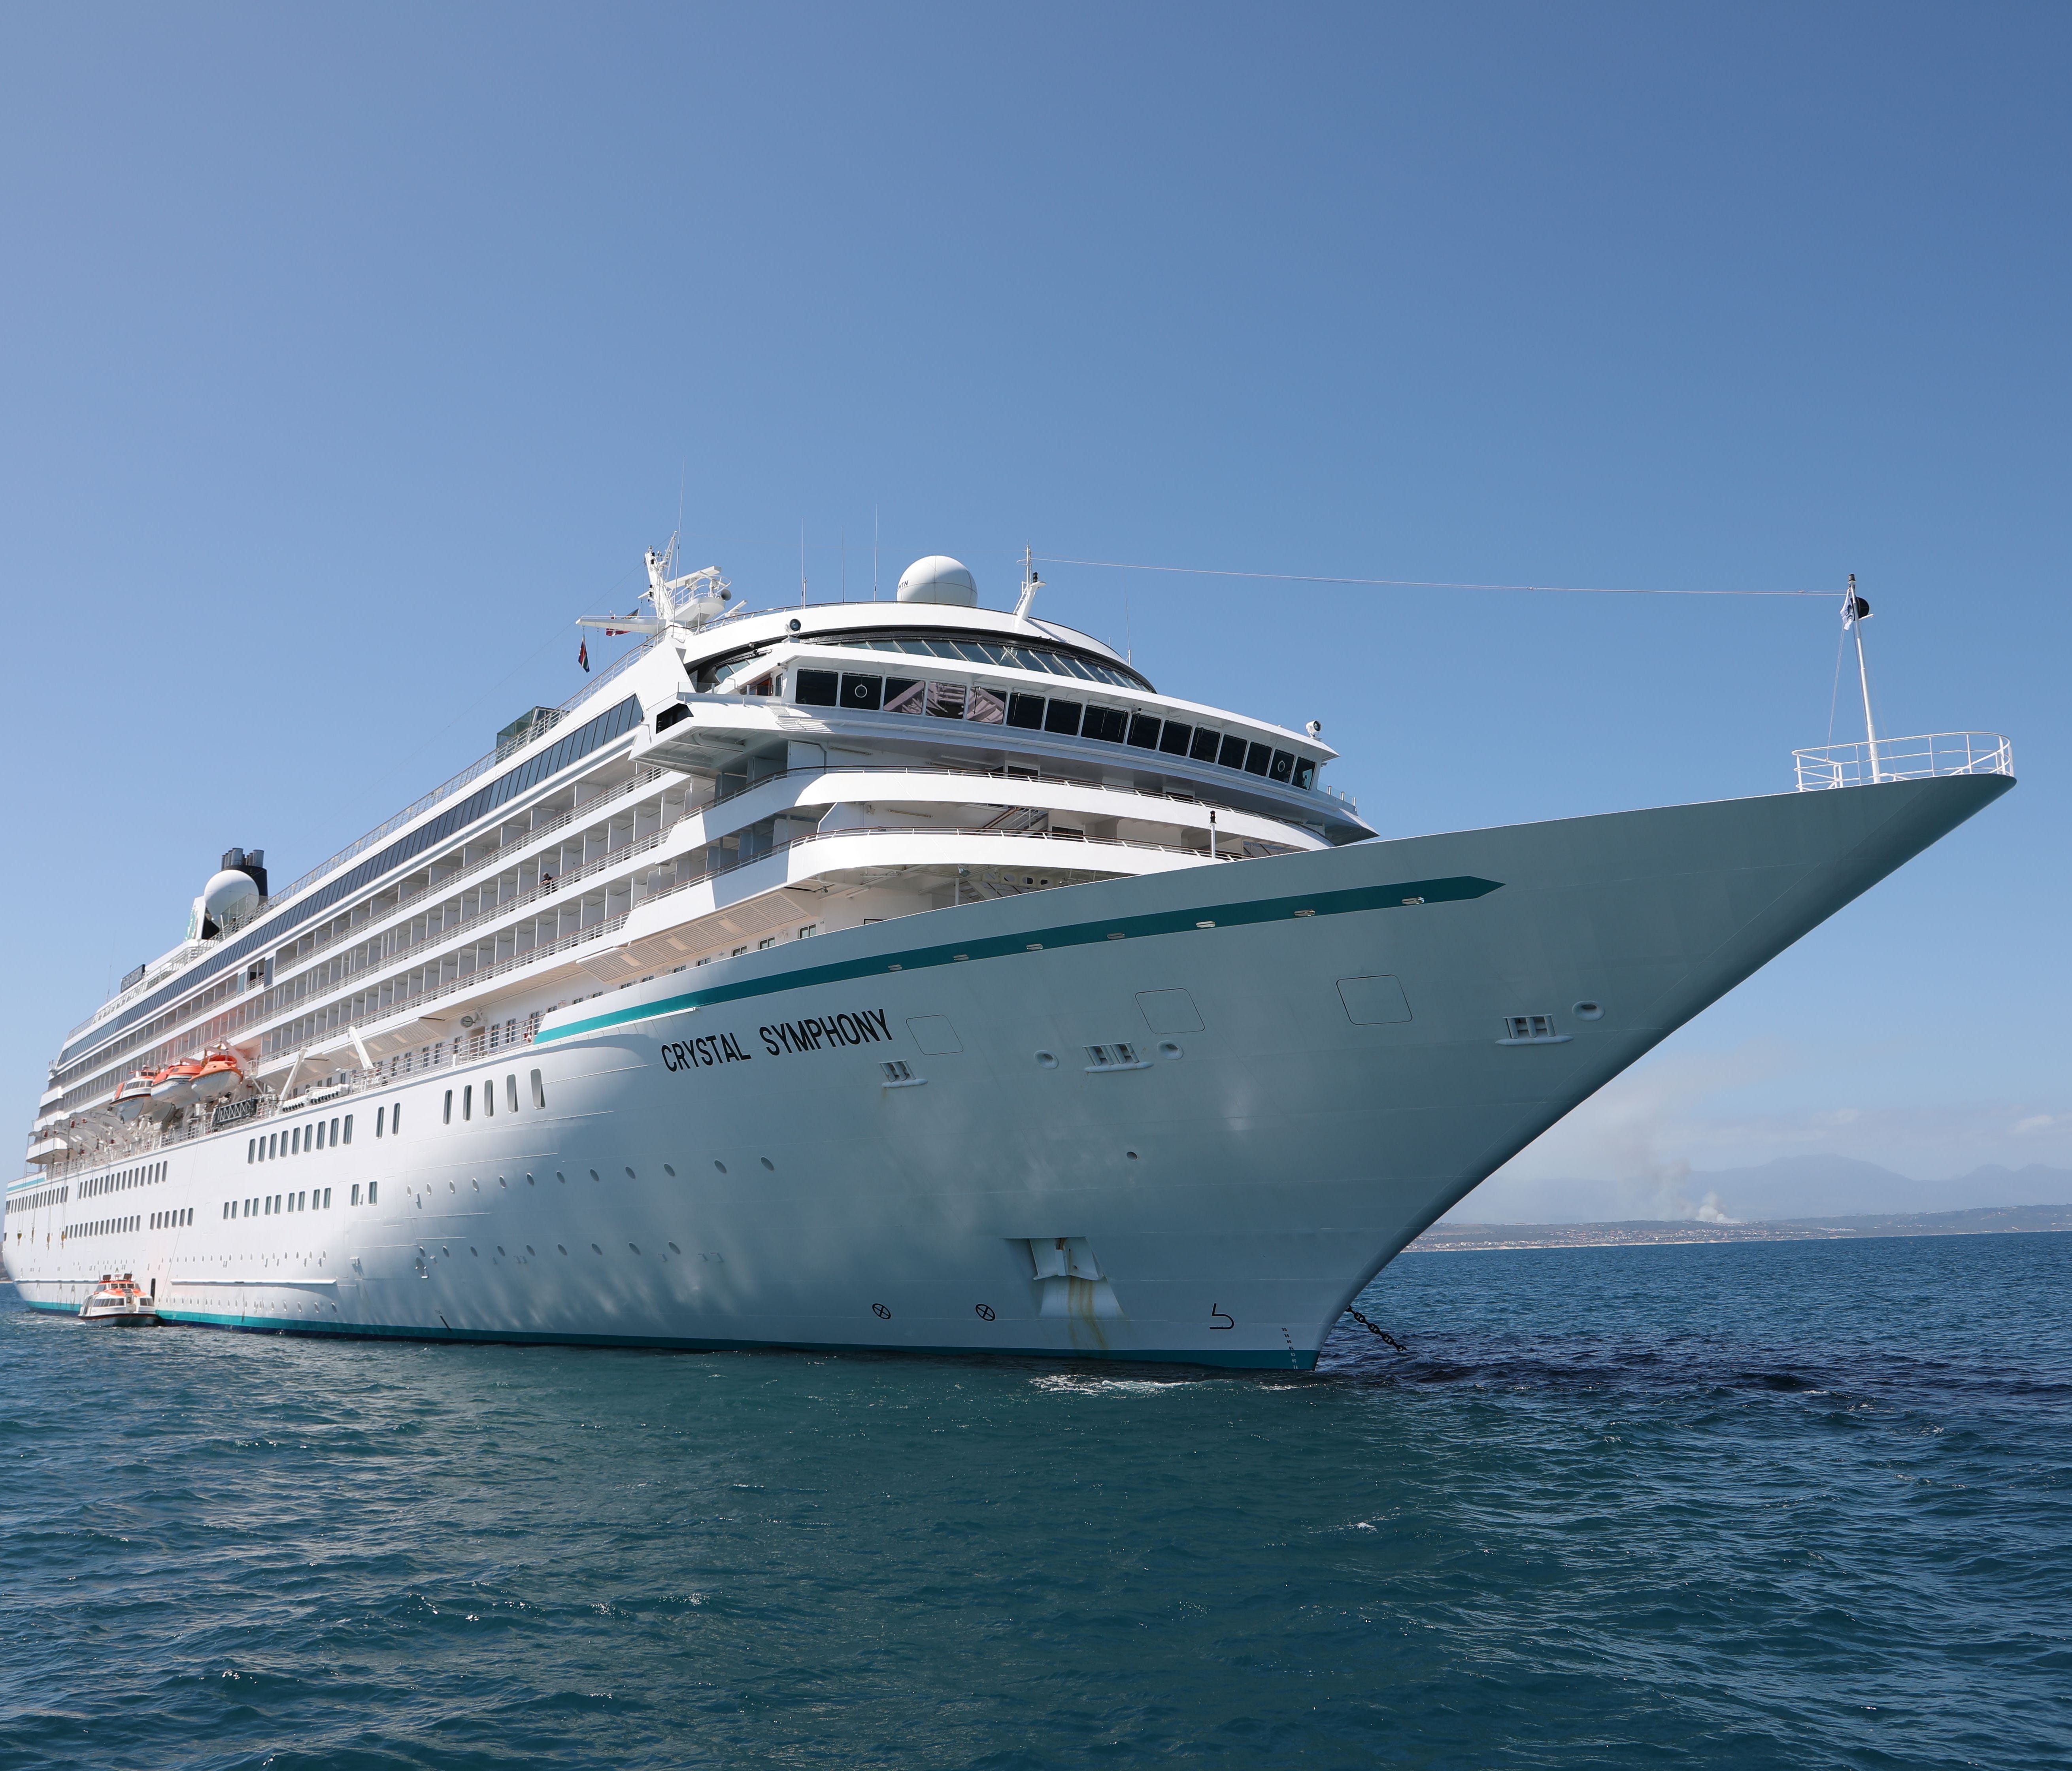 One of the most luxurious cruise ships afloat, Crystal  Cruises' 848-passenger Crystal Symphony recently emerged from a massive makeover designed to make it even more upscale.